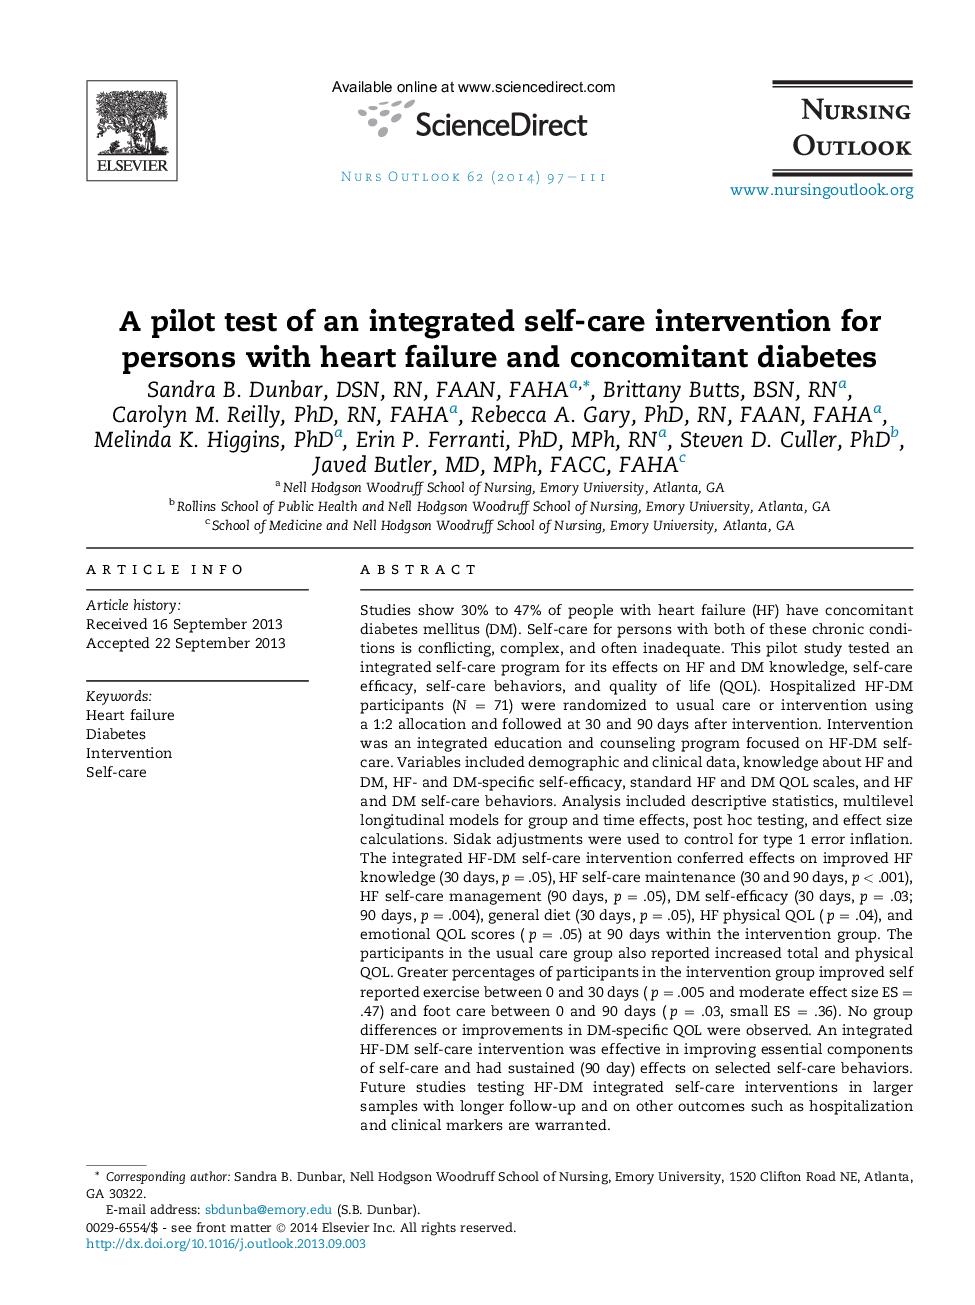 A pilot test of an integrated self-care intervention for persons with heart failure and concomitant diabetes